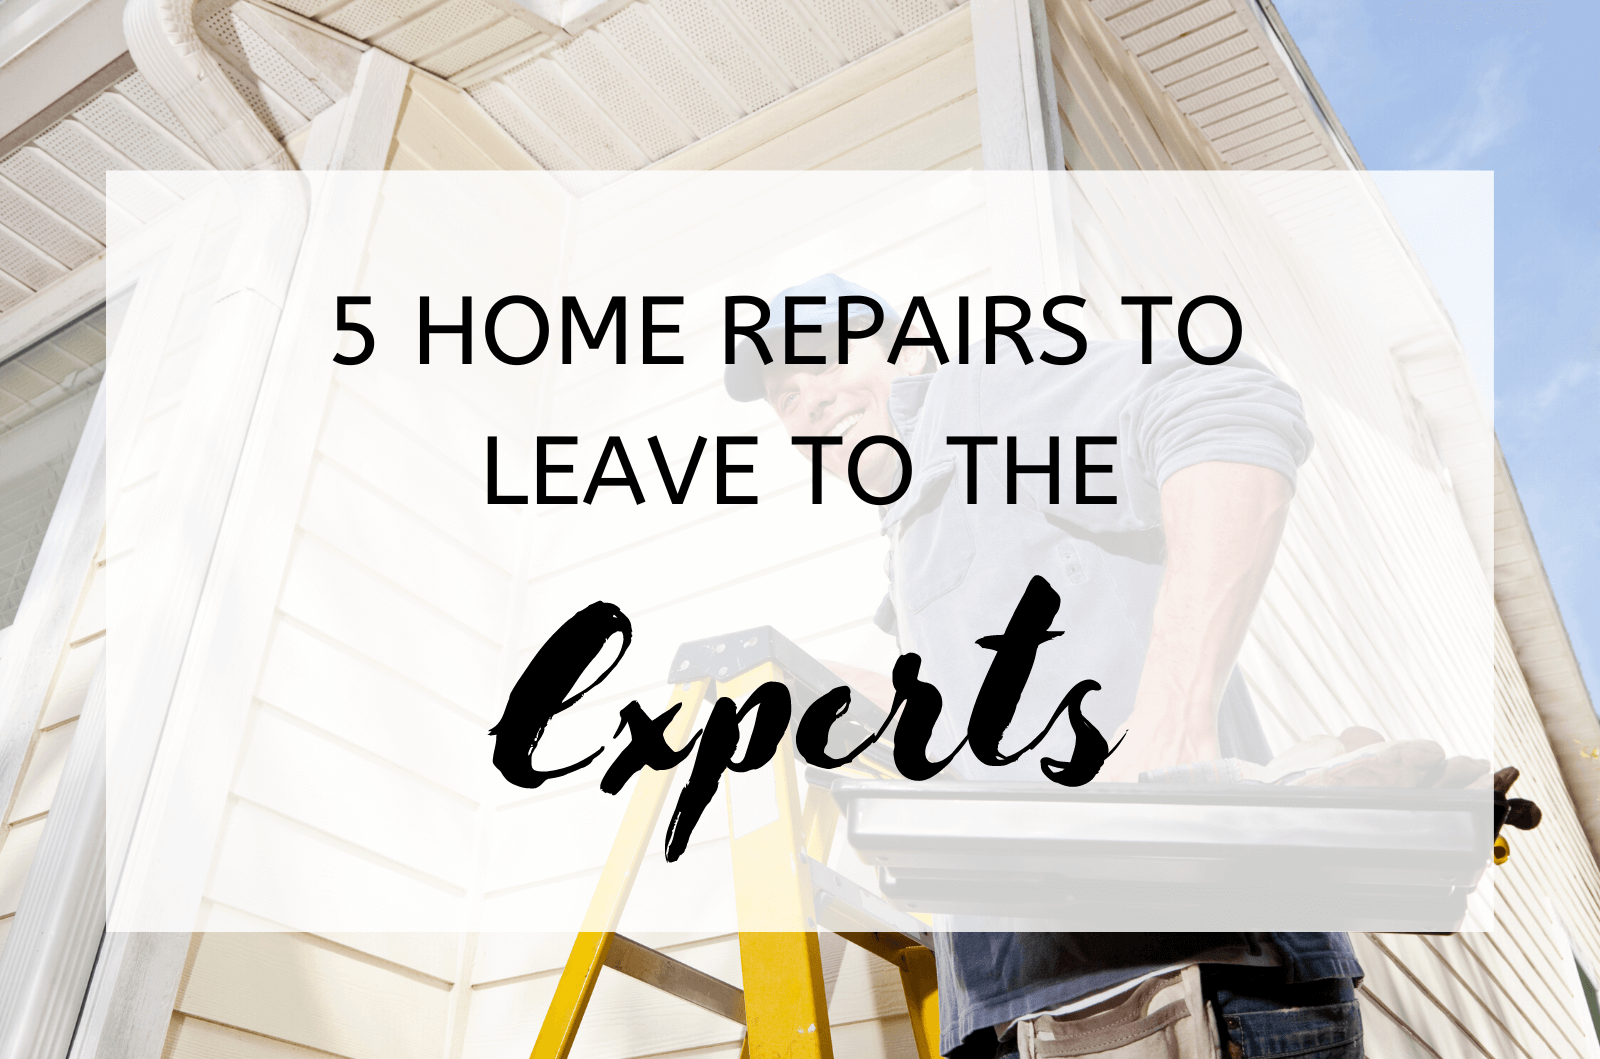 5 Home Repairs To Leave To The Experts (1)